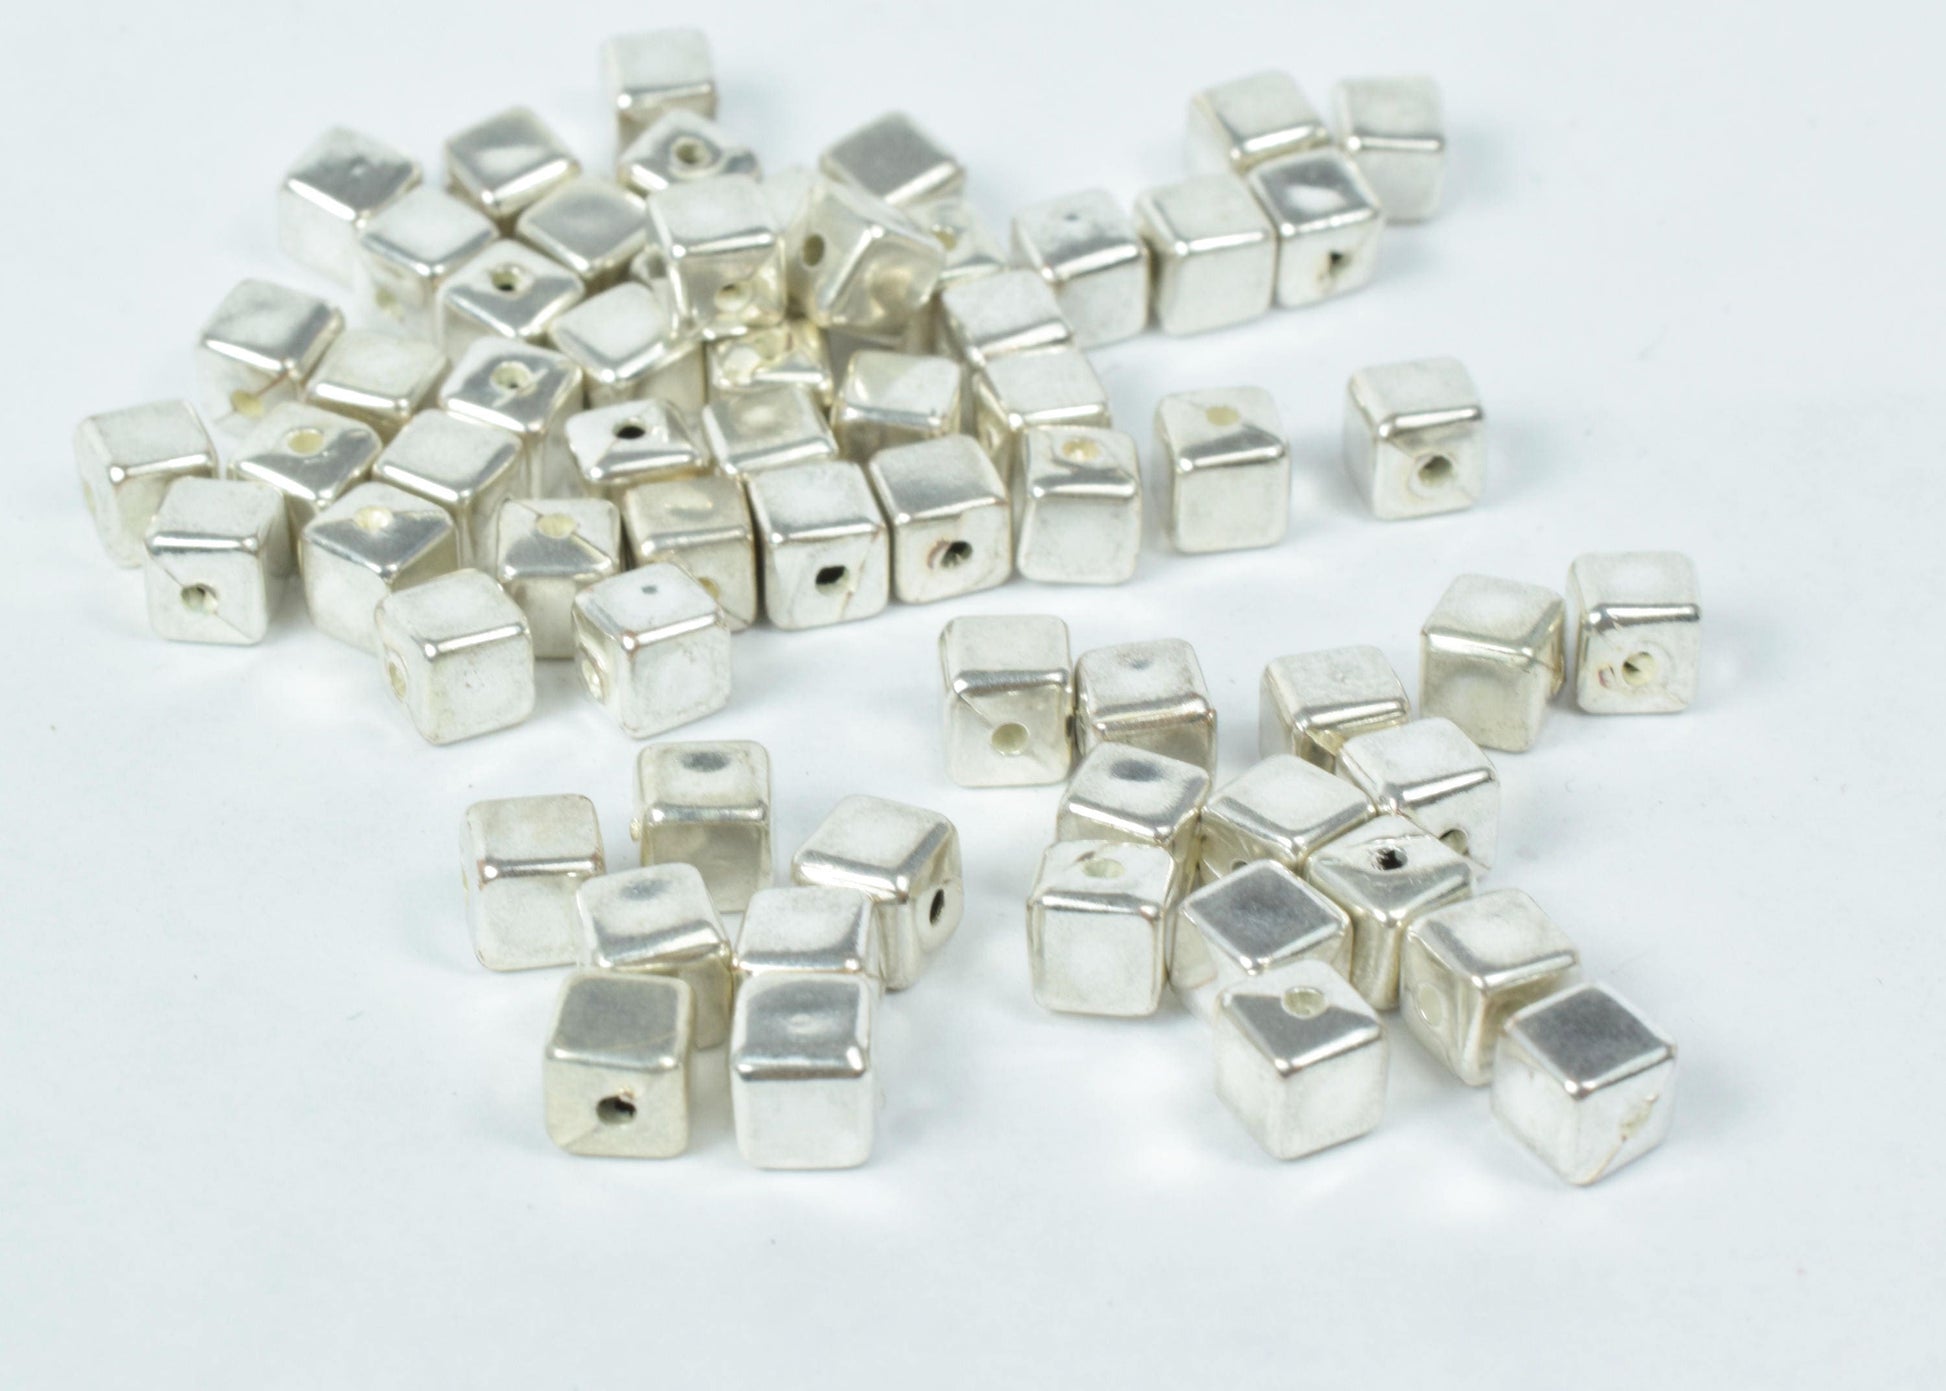 5mm Plastic Square Minimalists Beads, Sold by 100pcs, 1mm hole opening, Silver minimalist beads, Wholesale beads, Acrylic square beads,